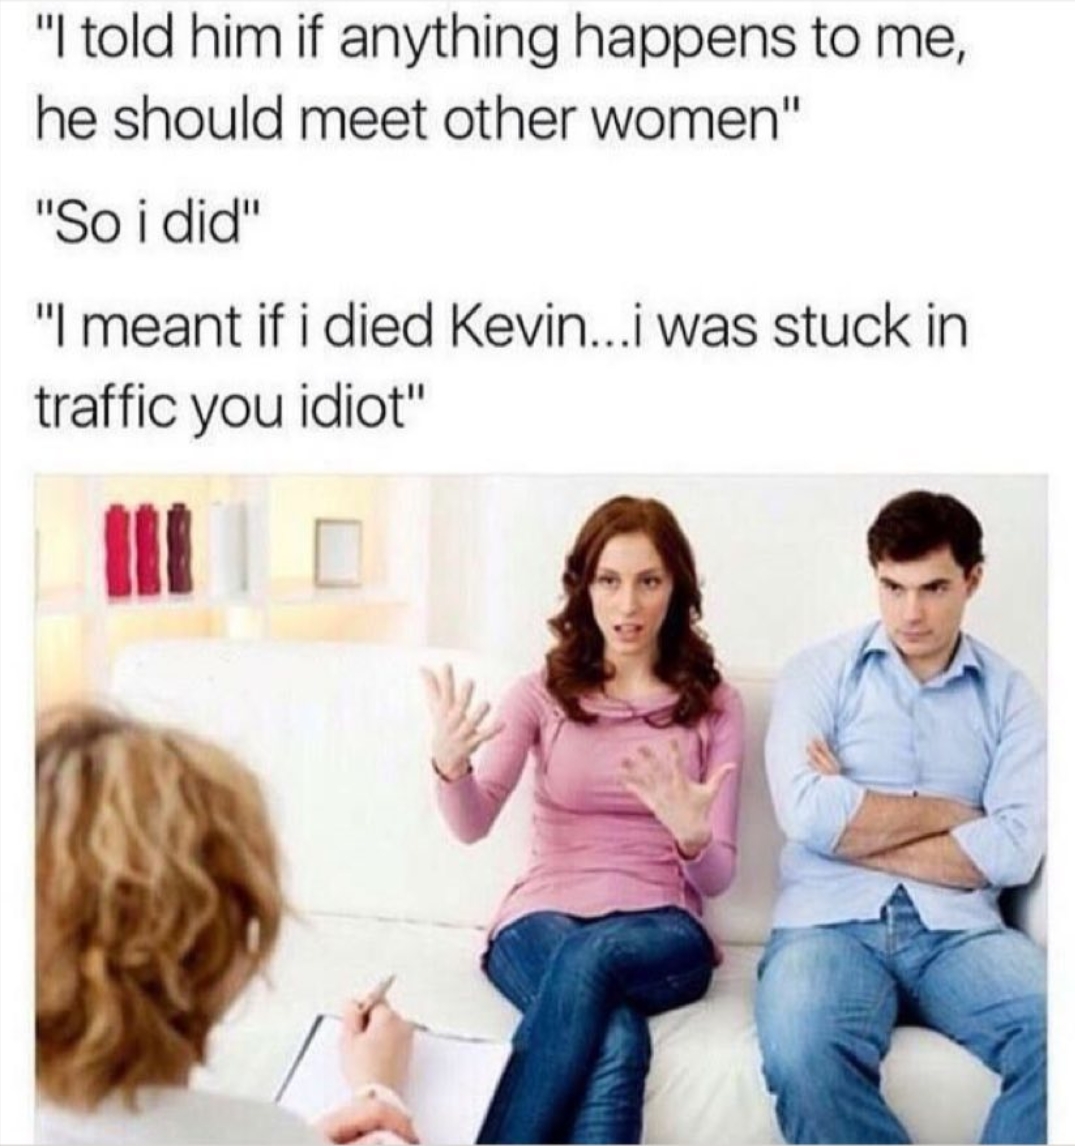 monday morning randomness - funny couple memes - "I told him if anything happens to me, he should meet other women" "So i did" "I meant if i died Kevin...i was stuck in traffic you idiot"